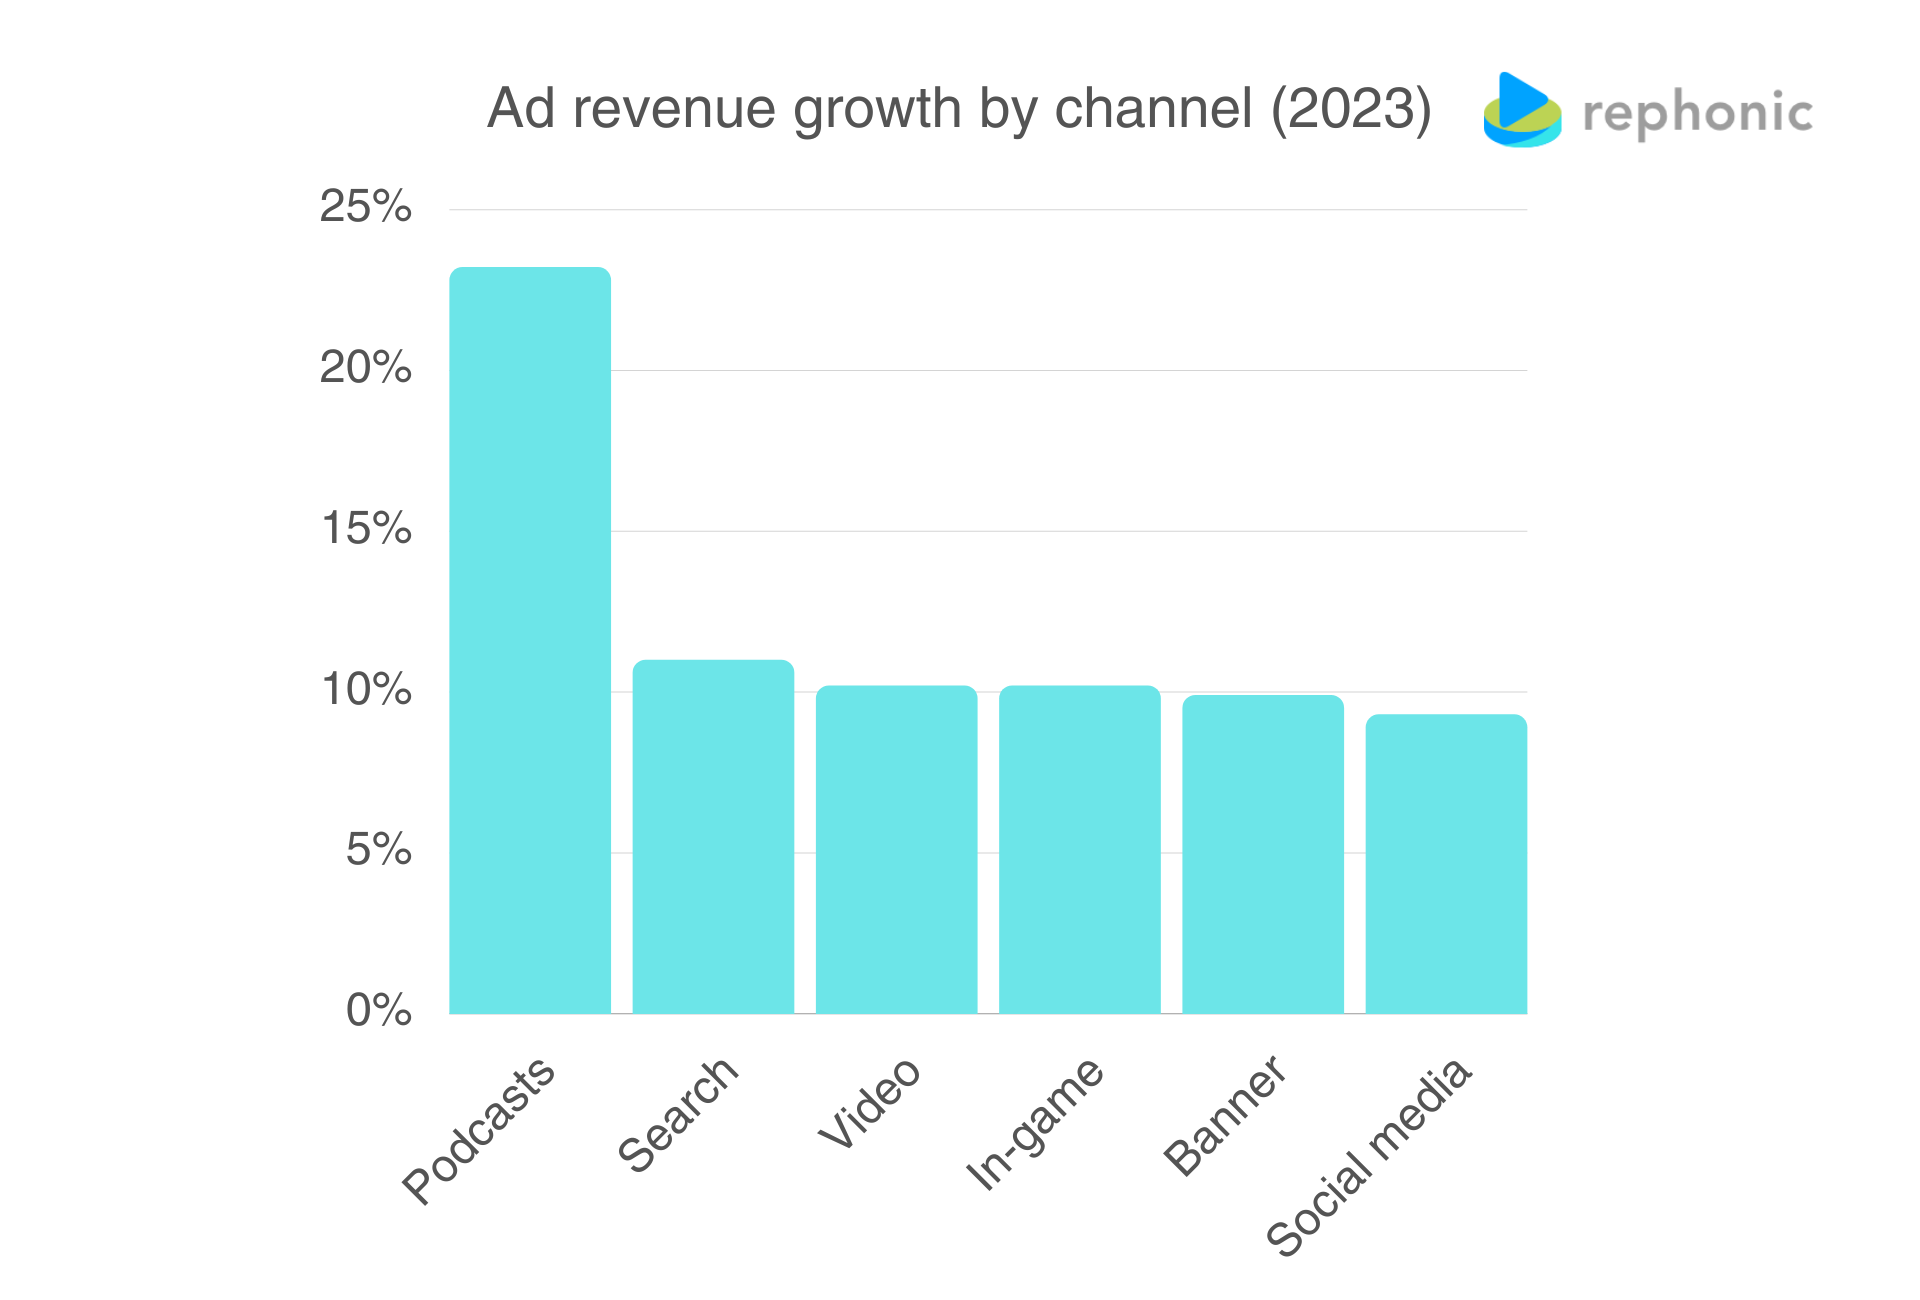 Global ad revenue growth by channel